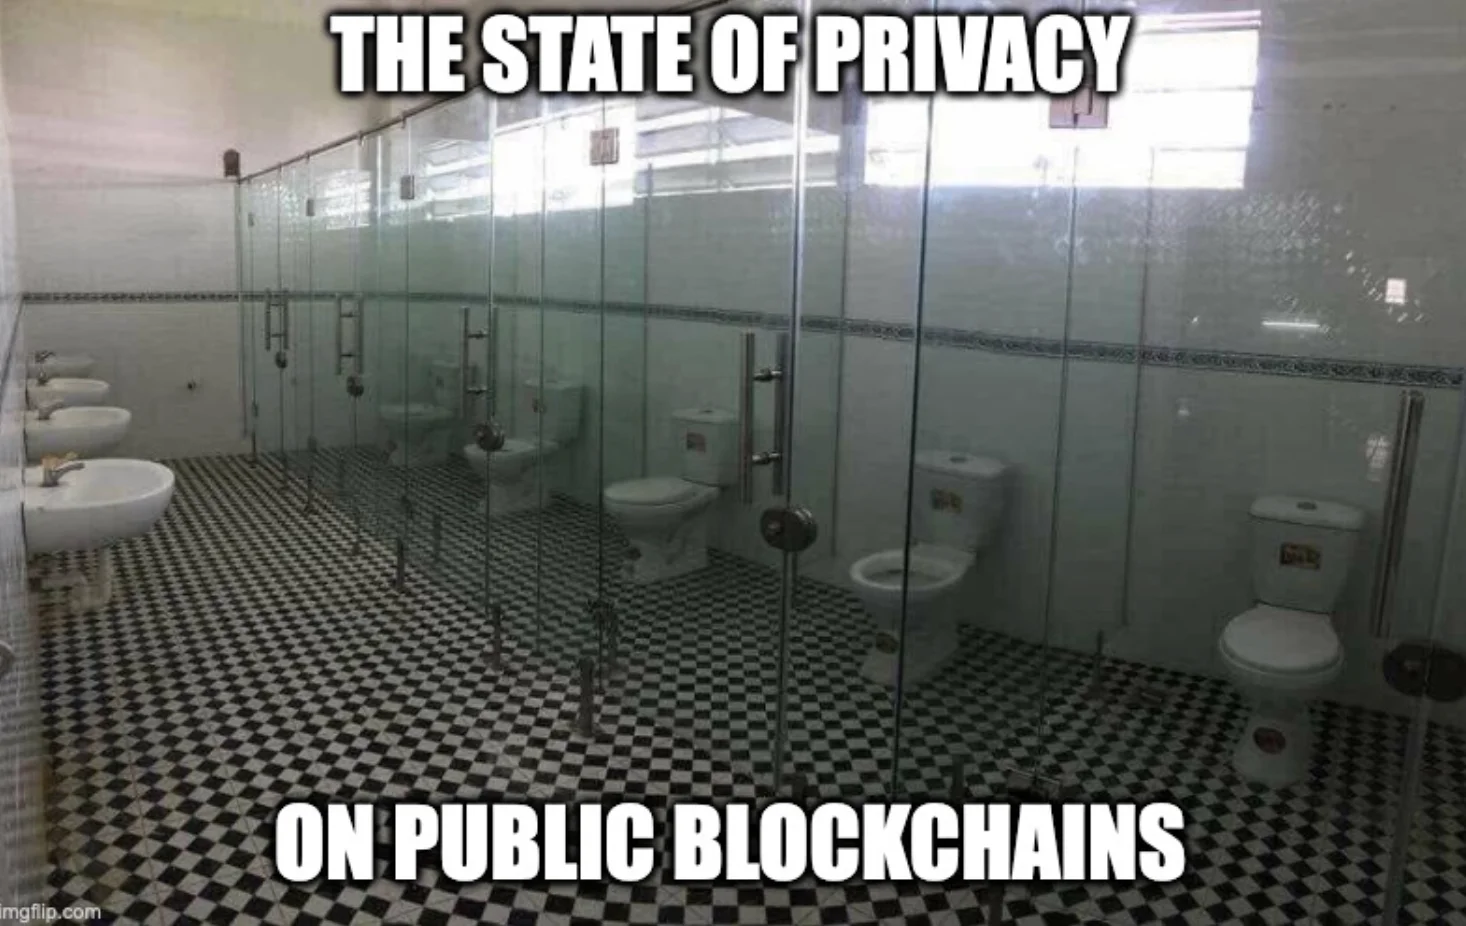 The state of privacy in transparent blockchains in inexistent